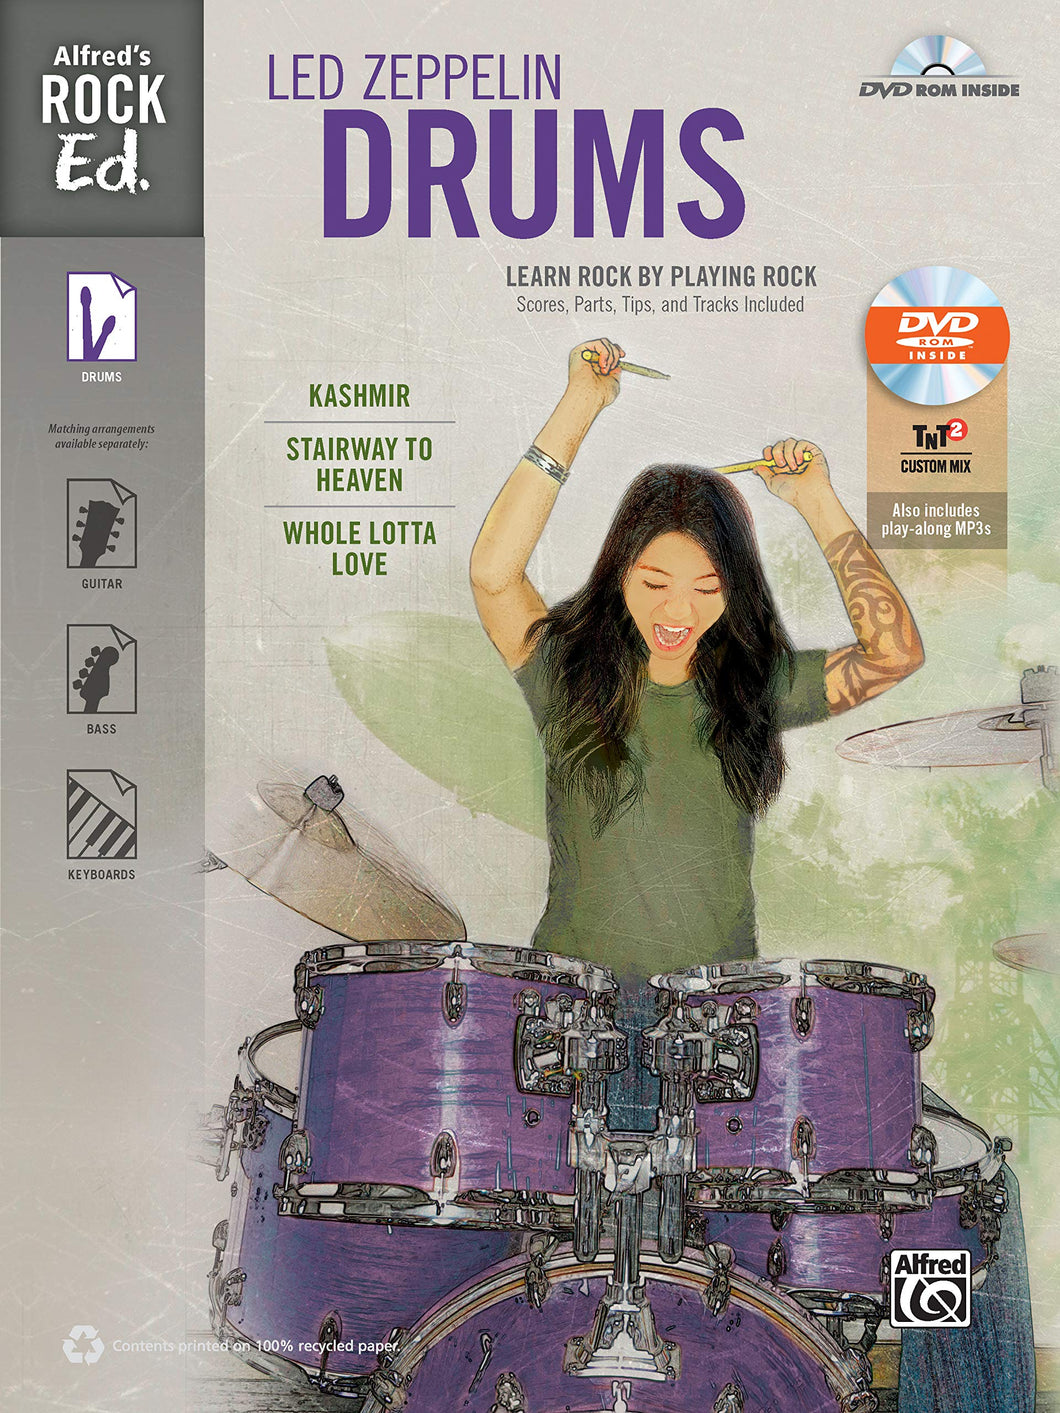 Alfred's Rock Ed. – Led Zeppelin Drums: Learn Rock by Playing Rock publication cover